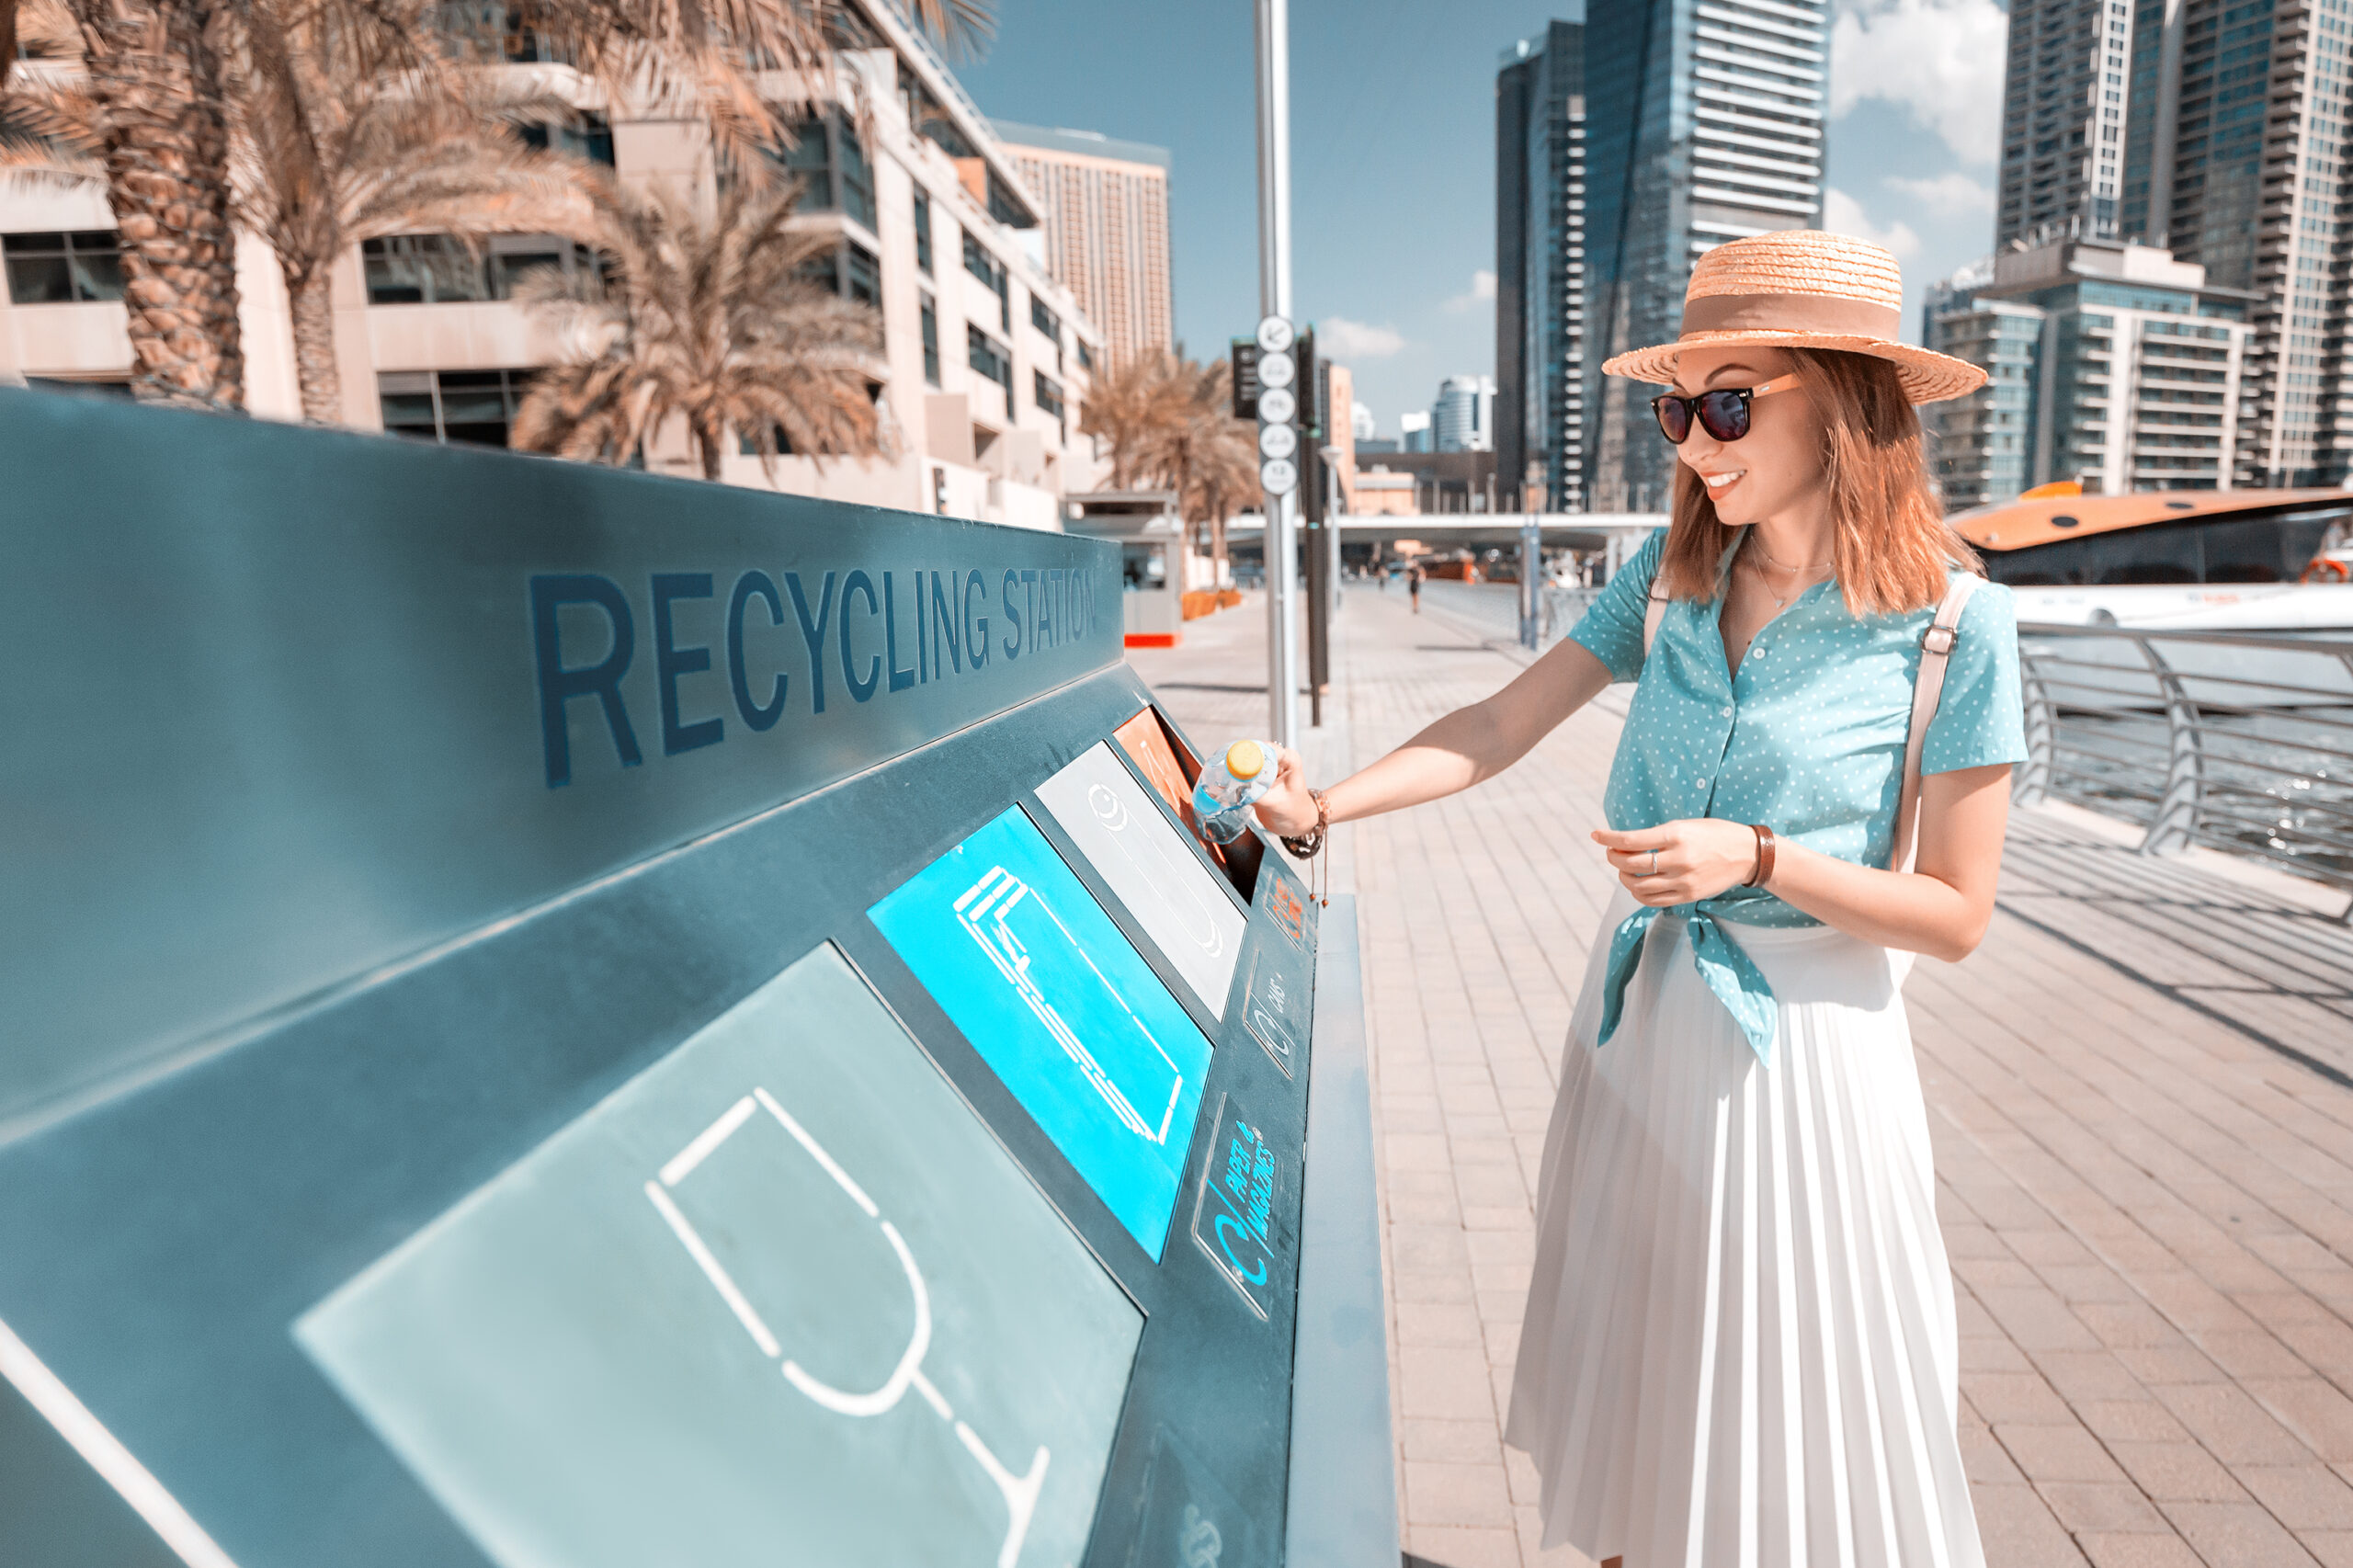  Dubai Can Recycling Initiative. girl sorts and throws garbage in a street station for recycling plastic waste. Environment conservation concept